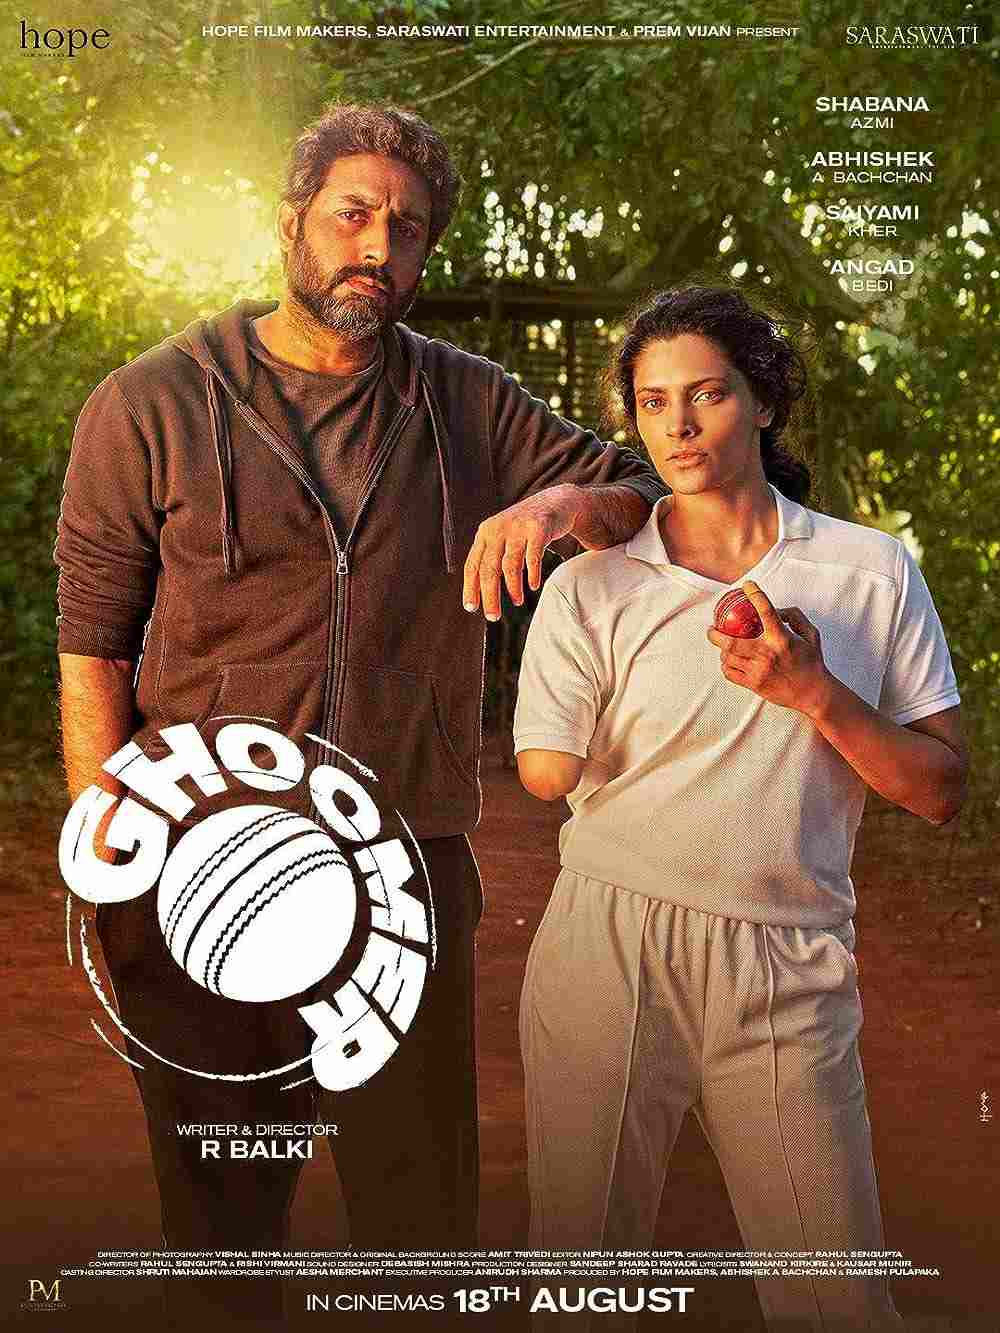 Ghoomer Movie Review